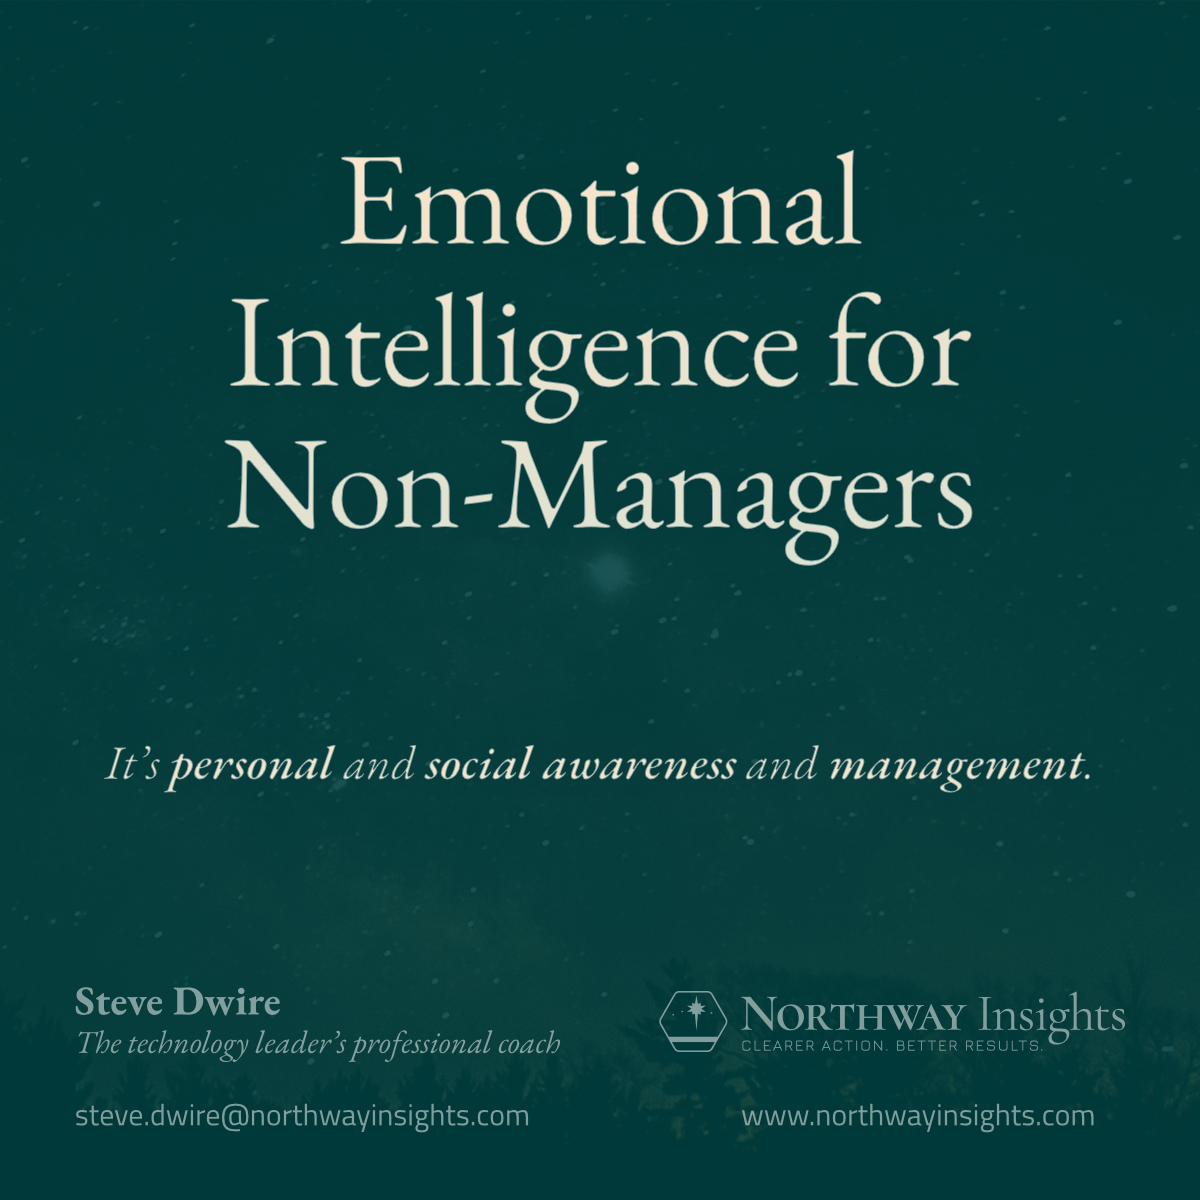 Emotional Intelligence for Non-Managers